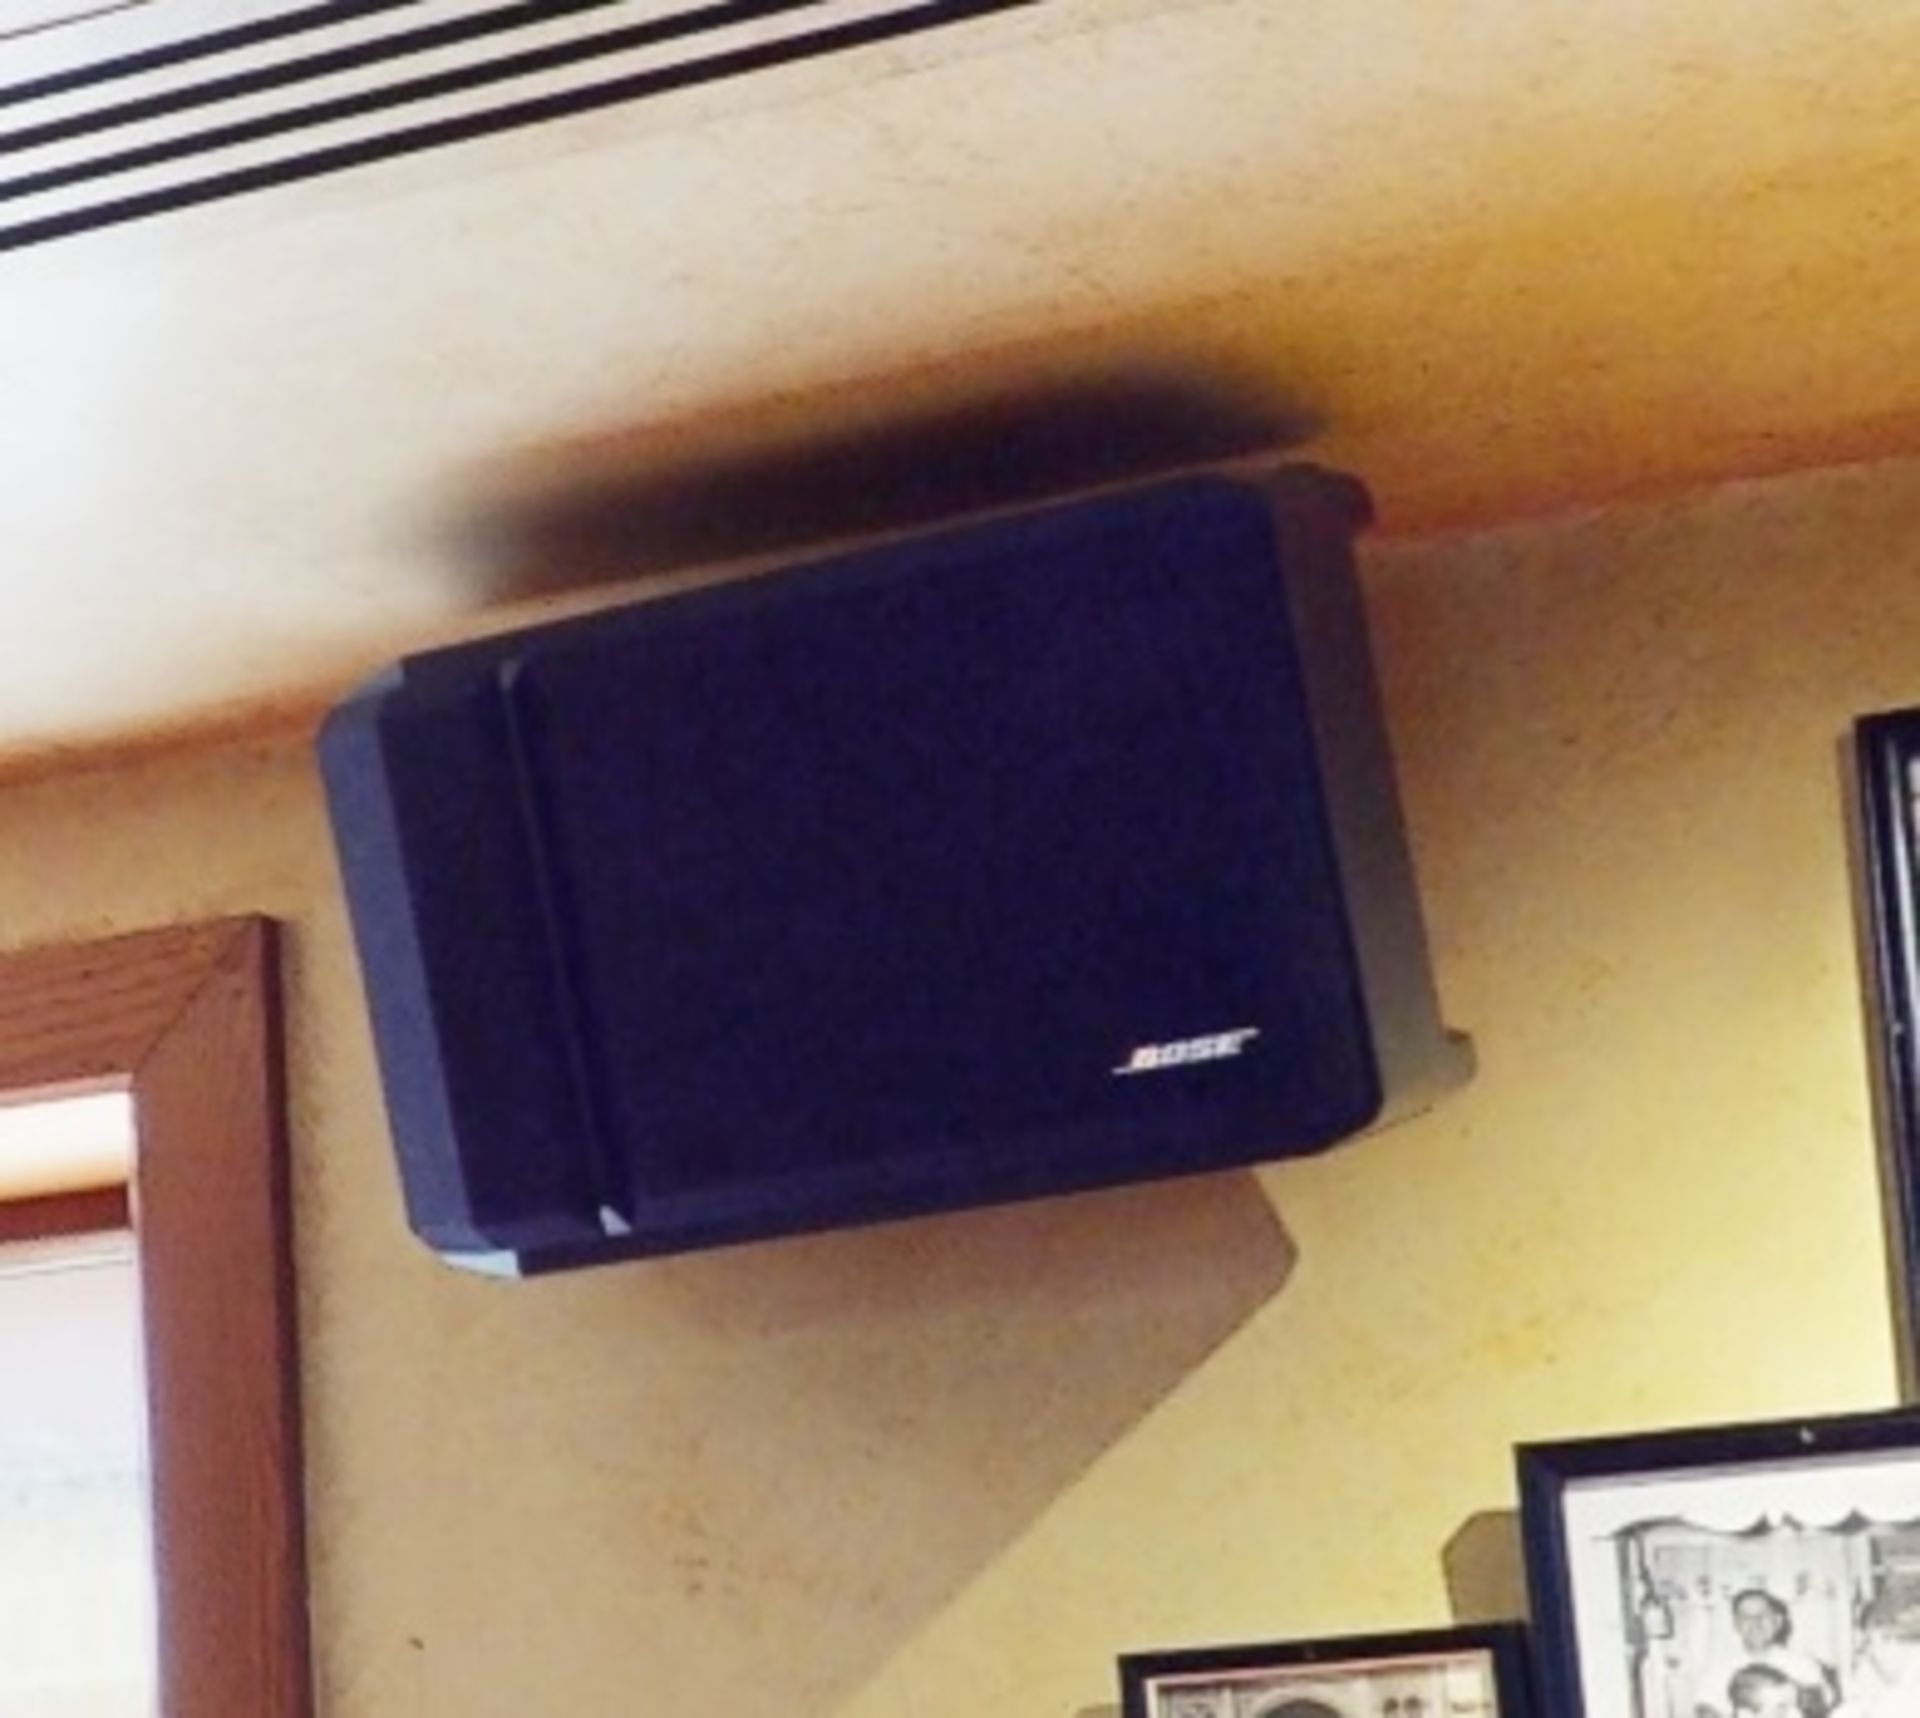 1 x Restaurant Audio System Including 1 x QSC RMX850 Amplifier, 12 x Bose Speaker System & More! - Image 15 of 17